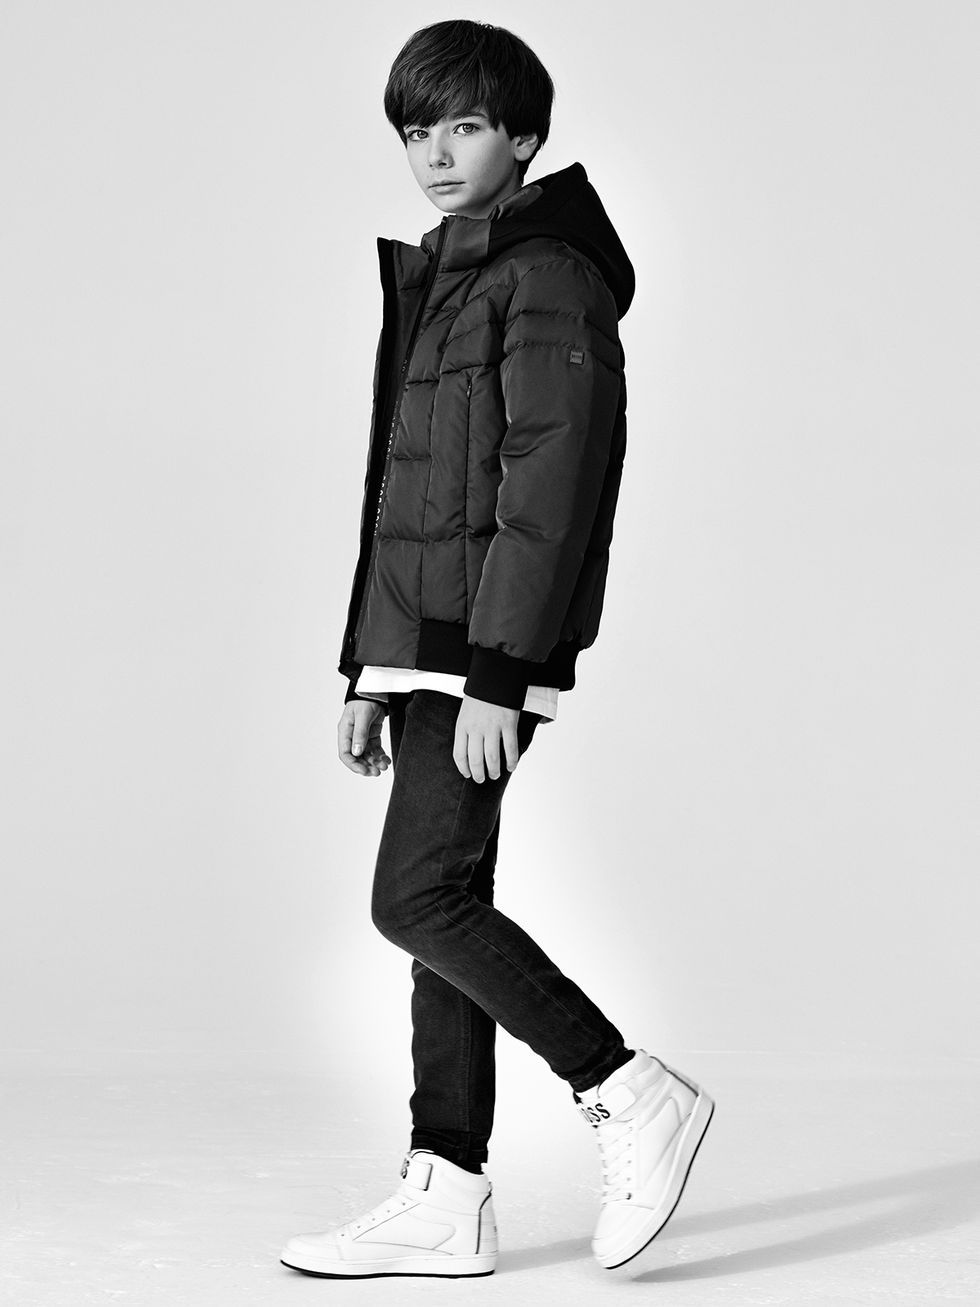 White, Clothing, Black, Standing, Shoulder, Outerwear, Fashion, Footwear, Jacket, Black-and-white, 